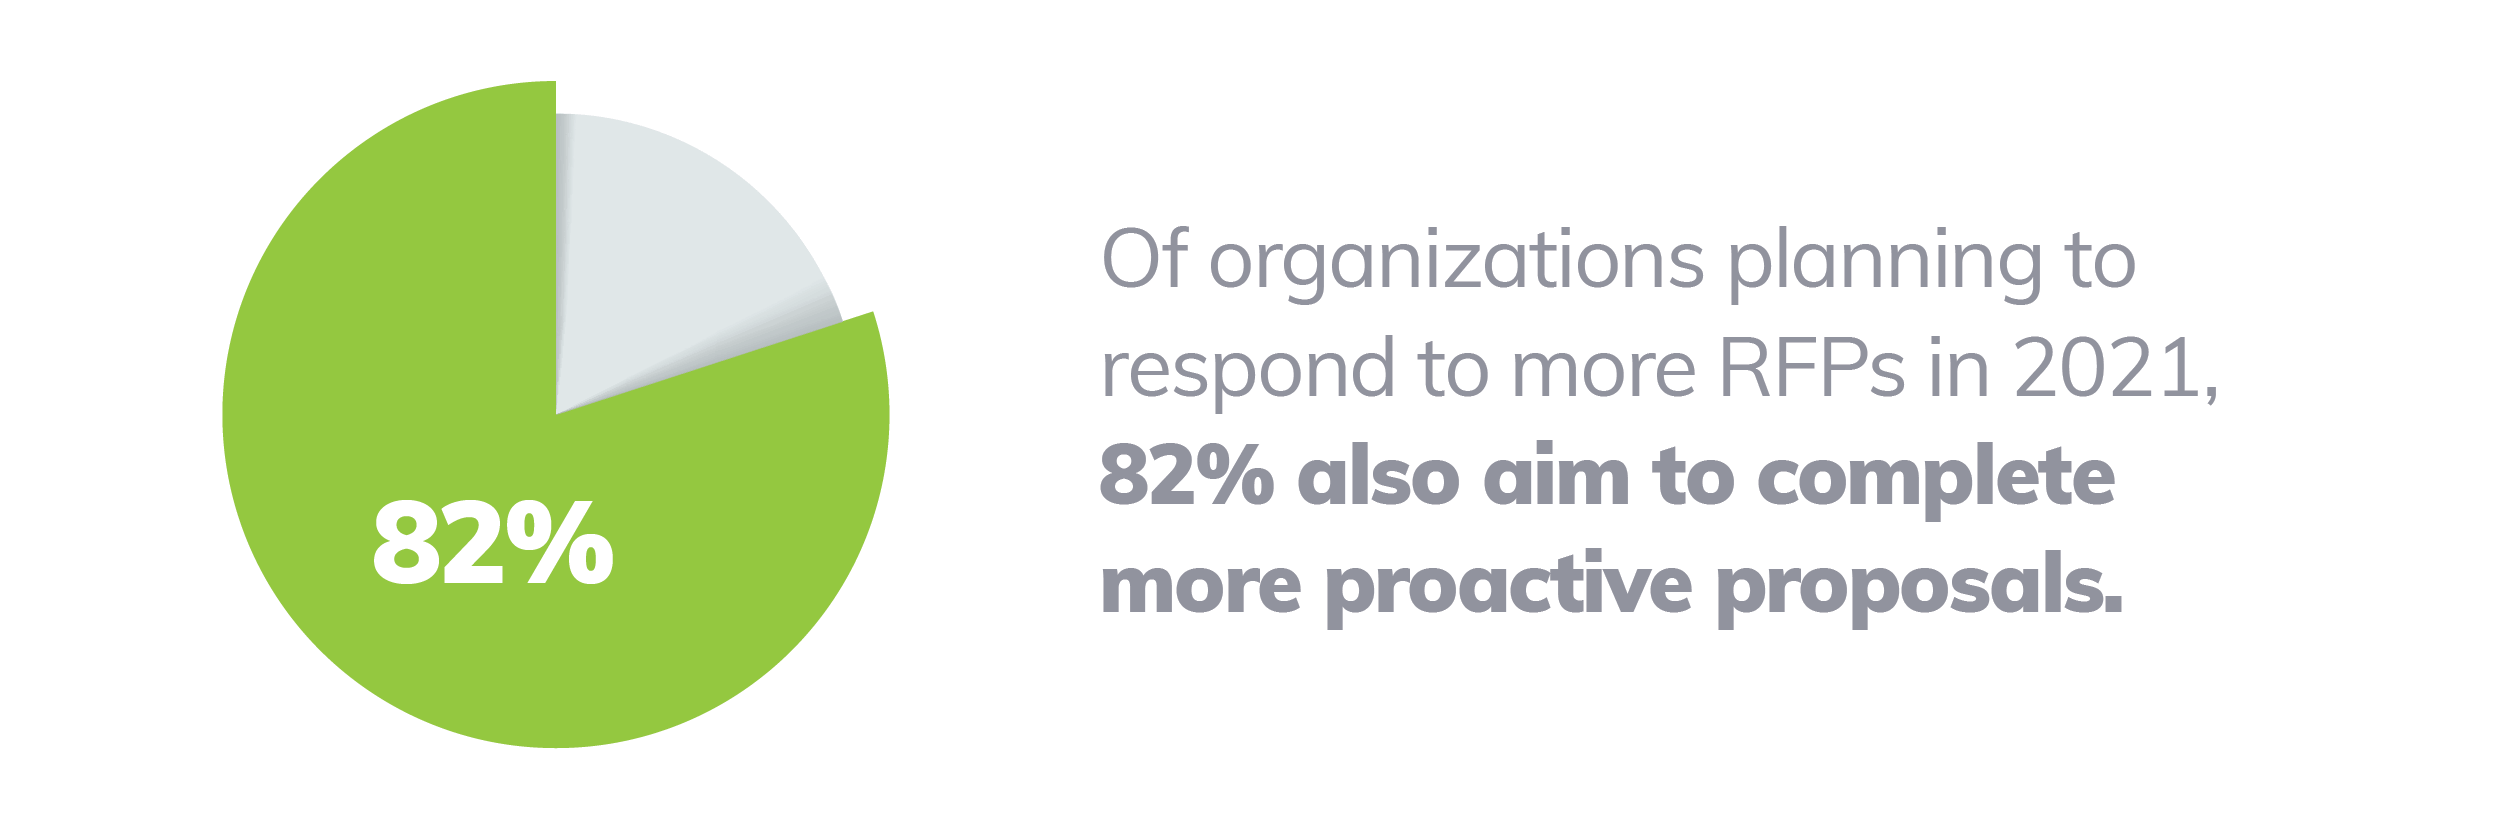 Of organizations planning to respond to more RFPs in 2021, 82% also aim to complete more proactive proposals